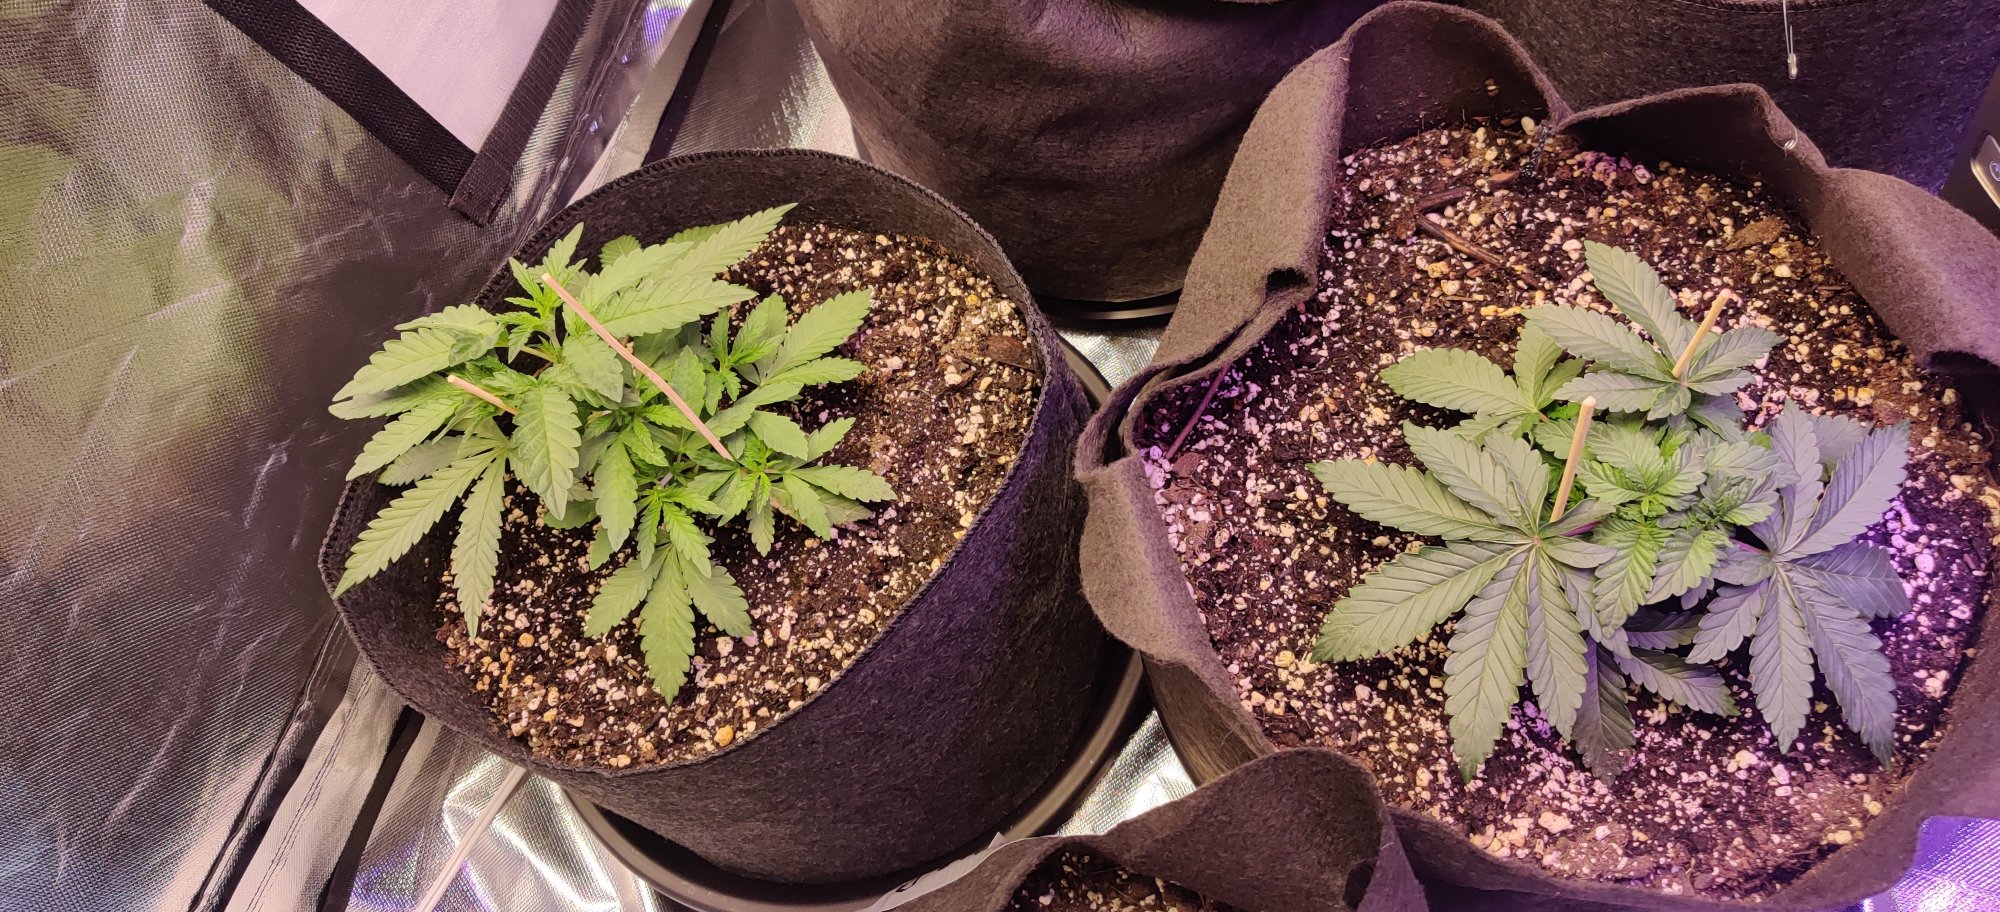 Help differentiating strains from free seeds